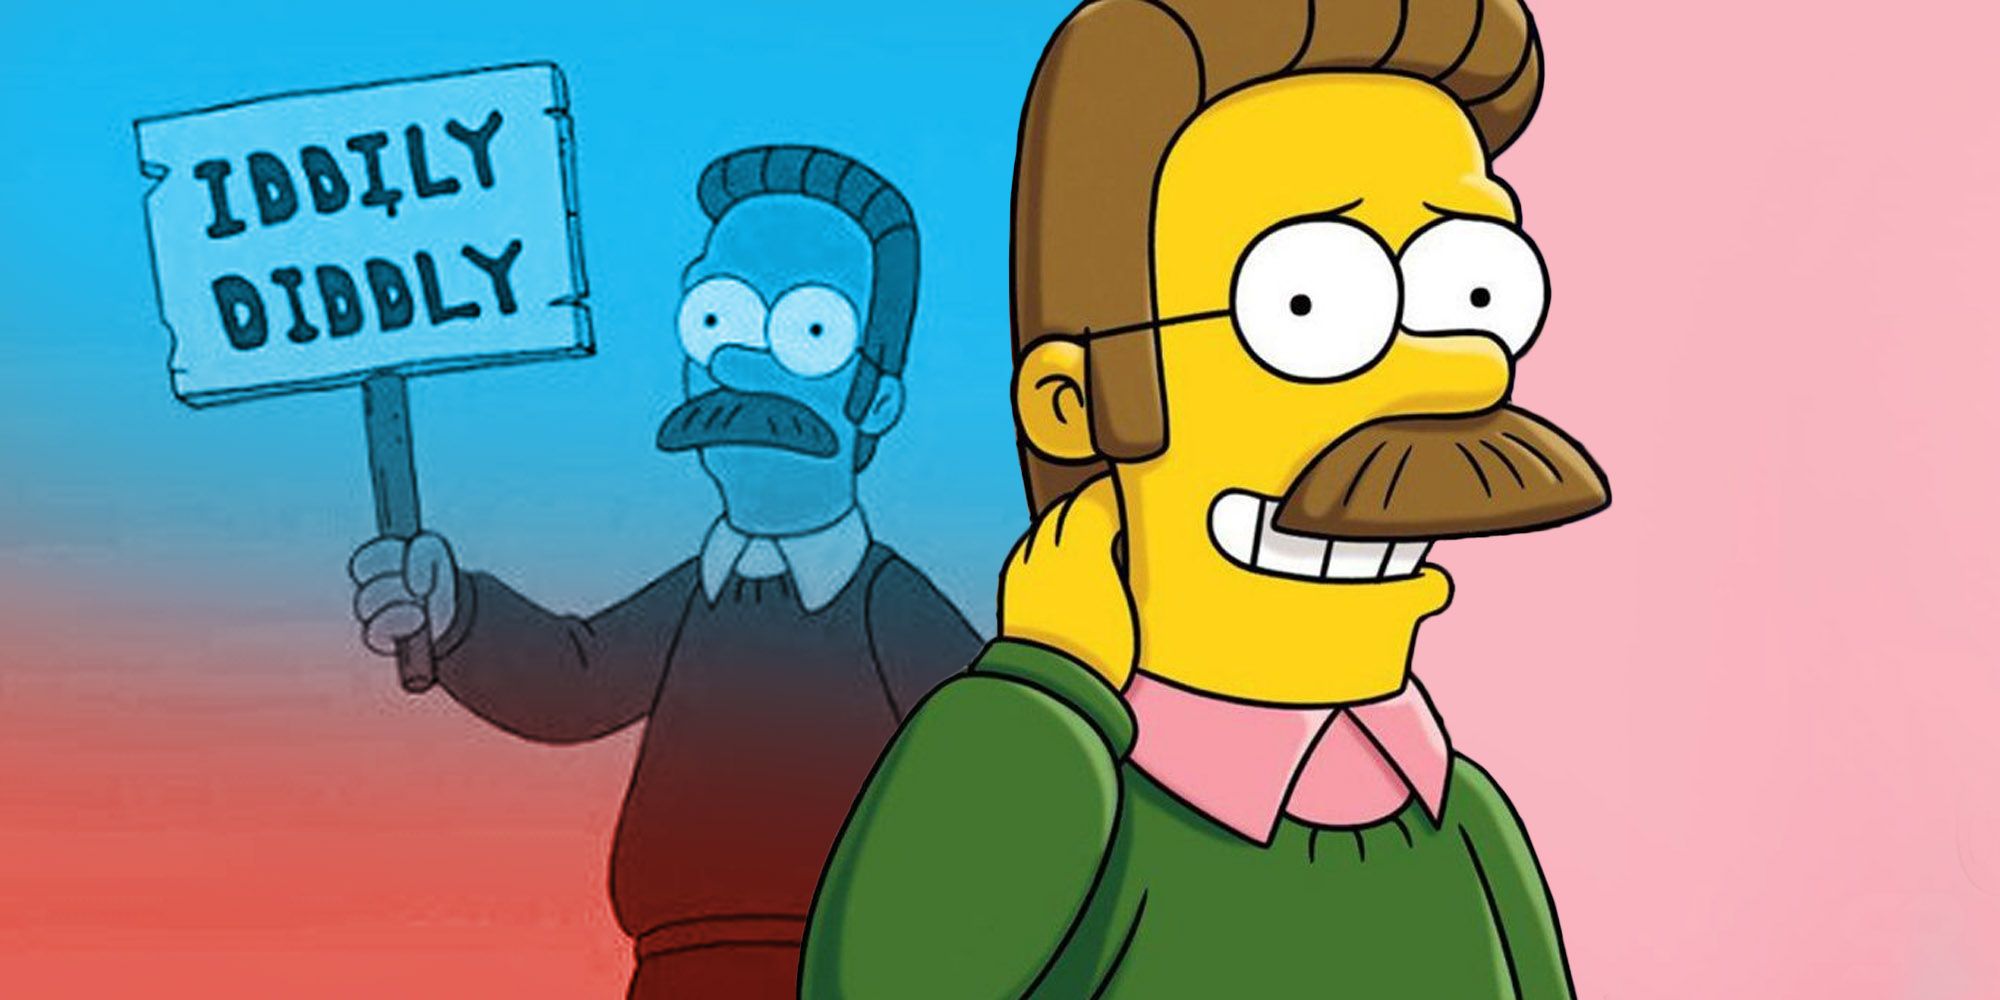 The simpsons Ned flanders way of talking